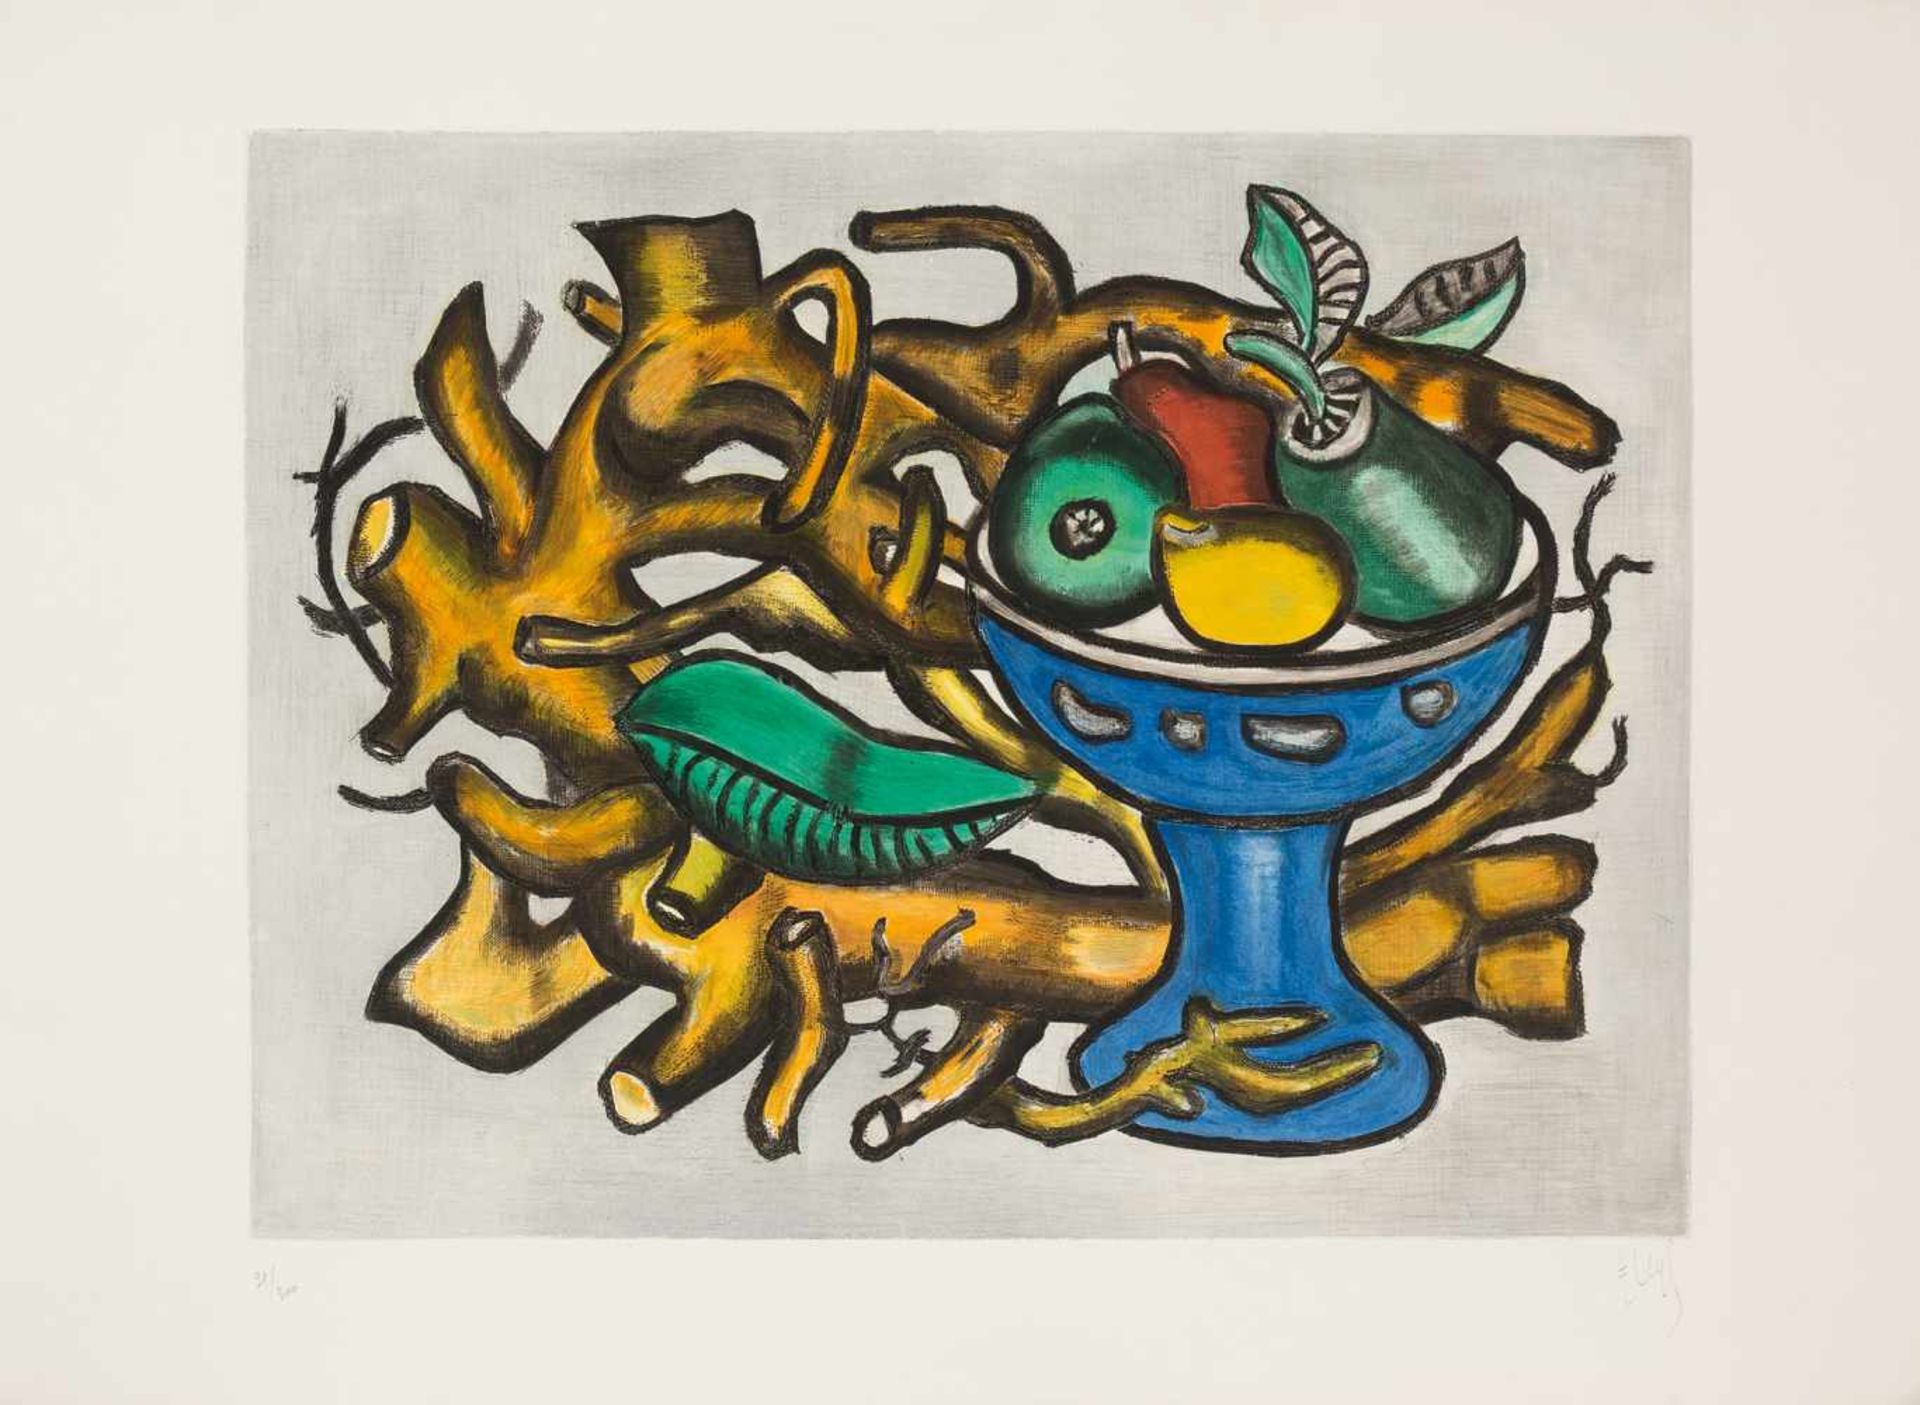 Fernand Léger (1881 - Gif-sur-Yvette, France, 1955) Aquatint and etched print on paper. Signed in